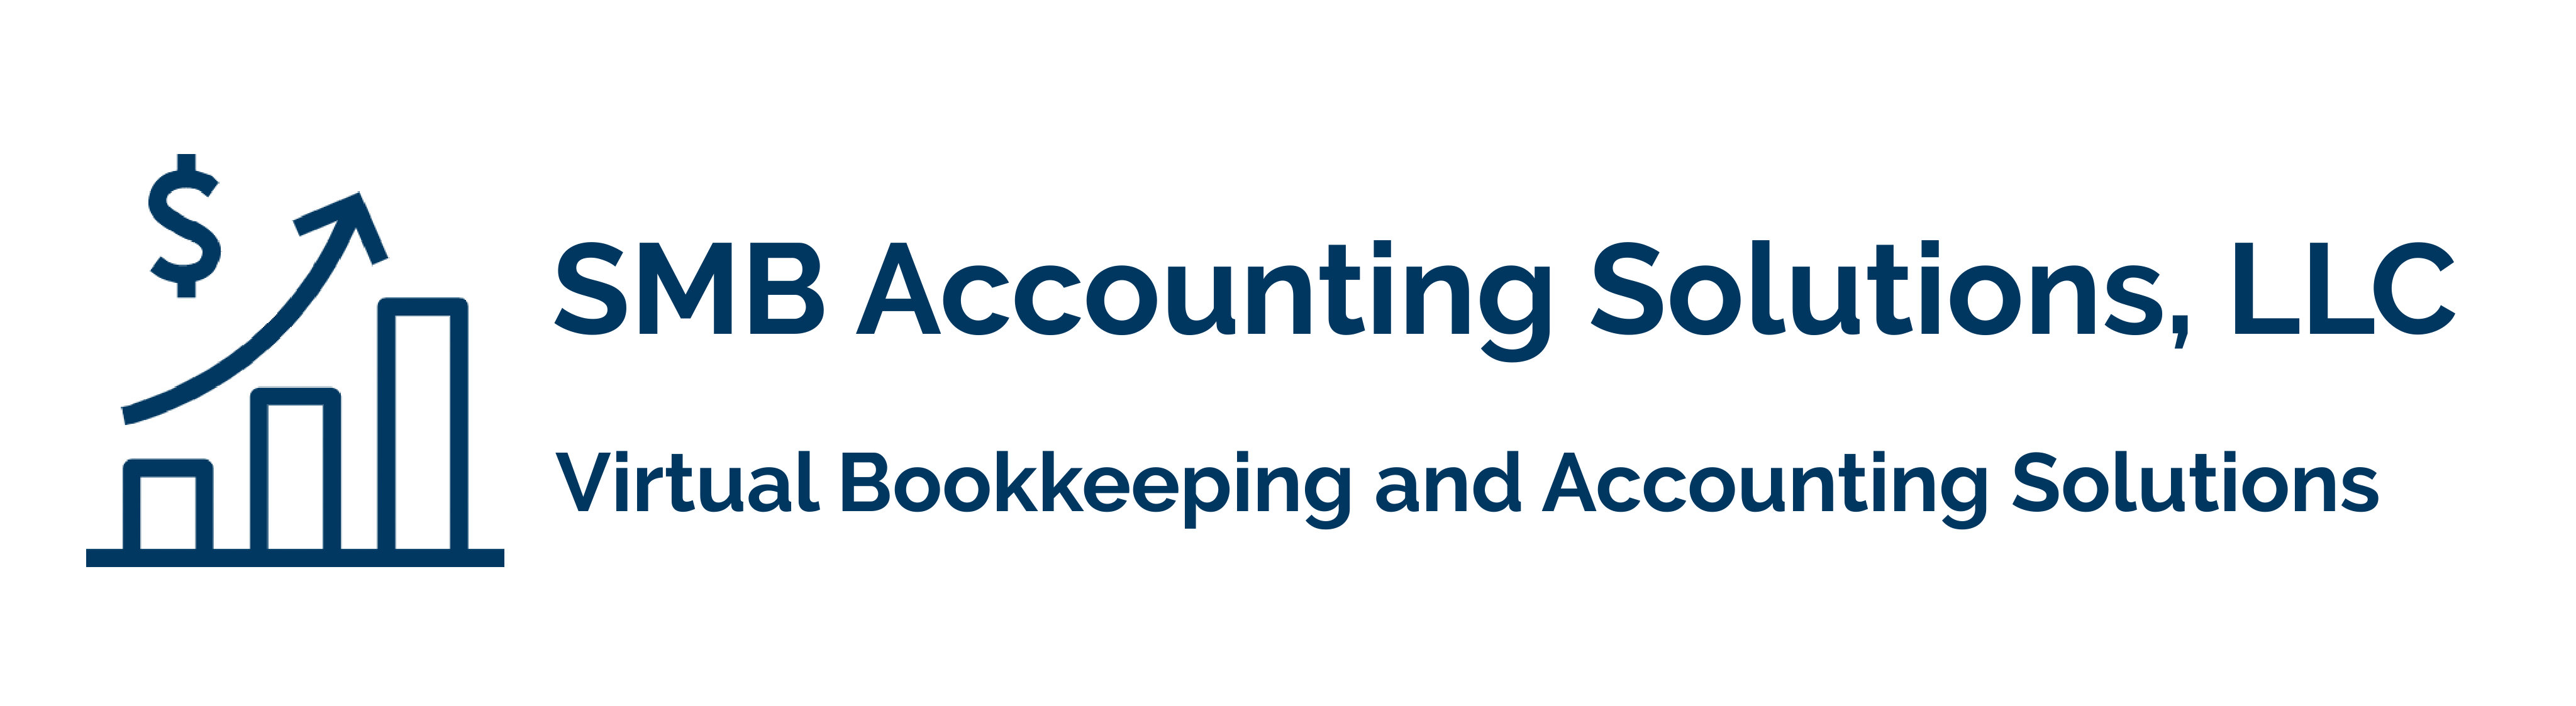 Bookkeeper & Accountant | SMB Accounting Solutions, LLC